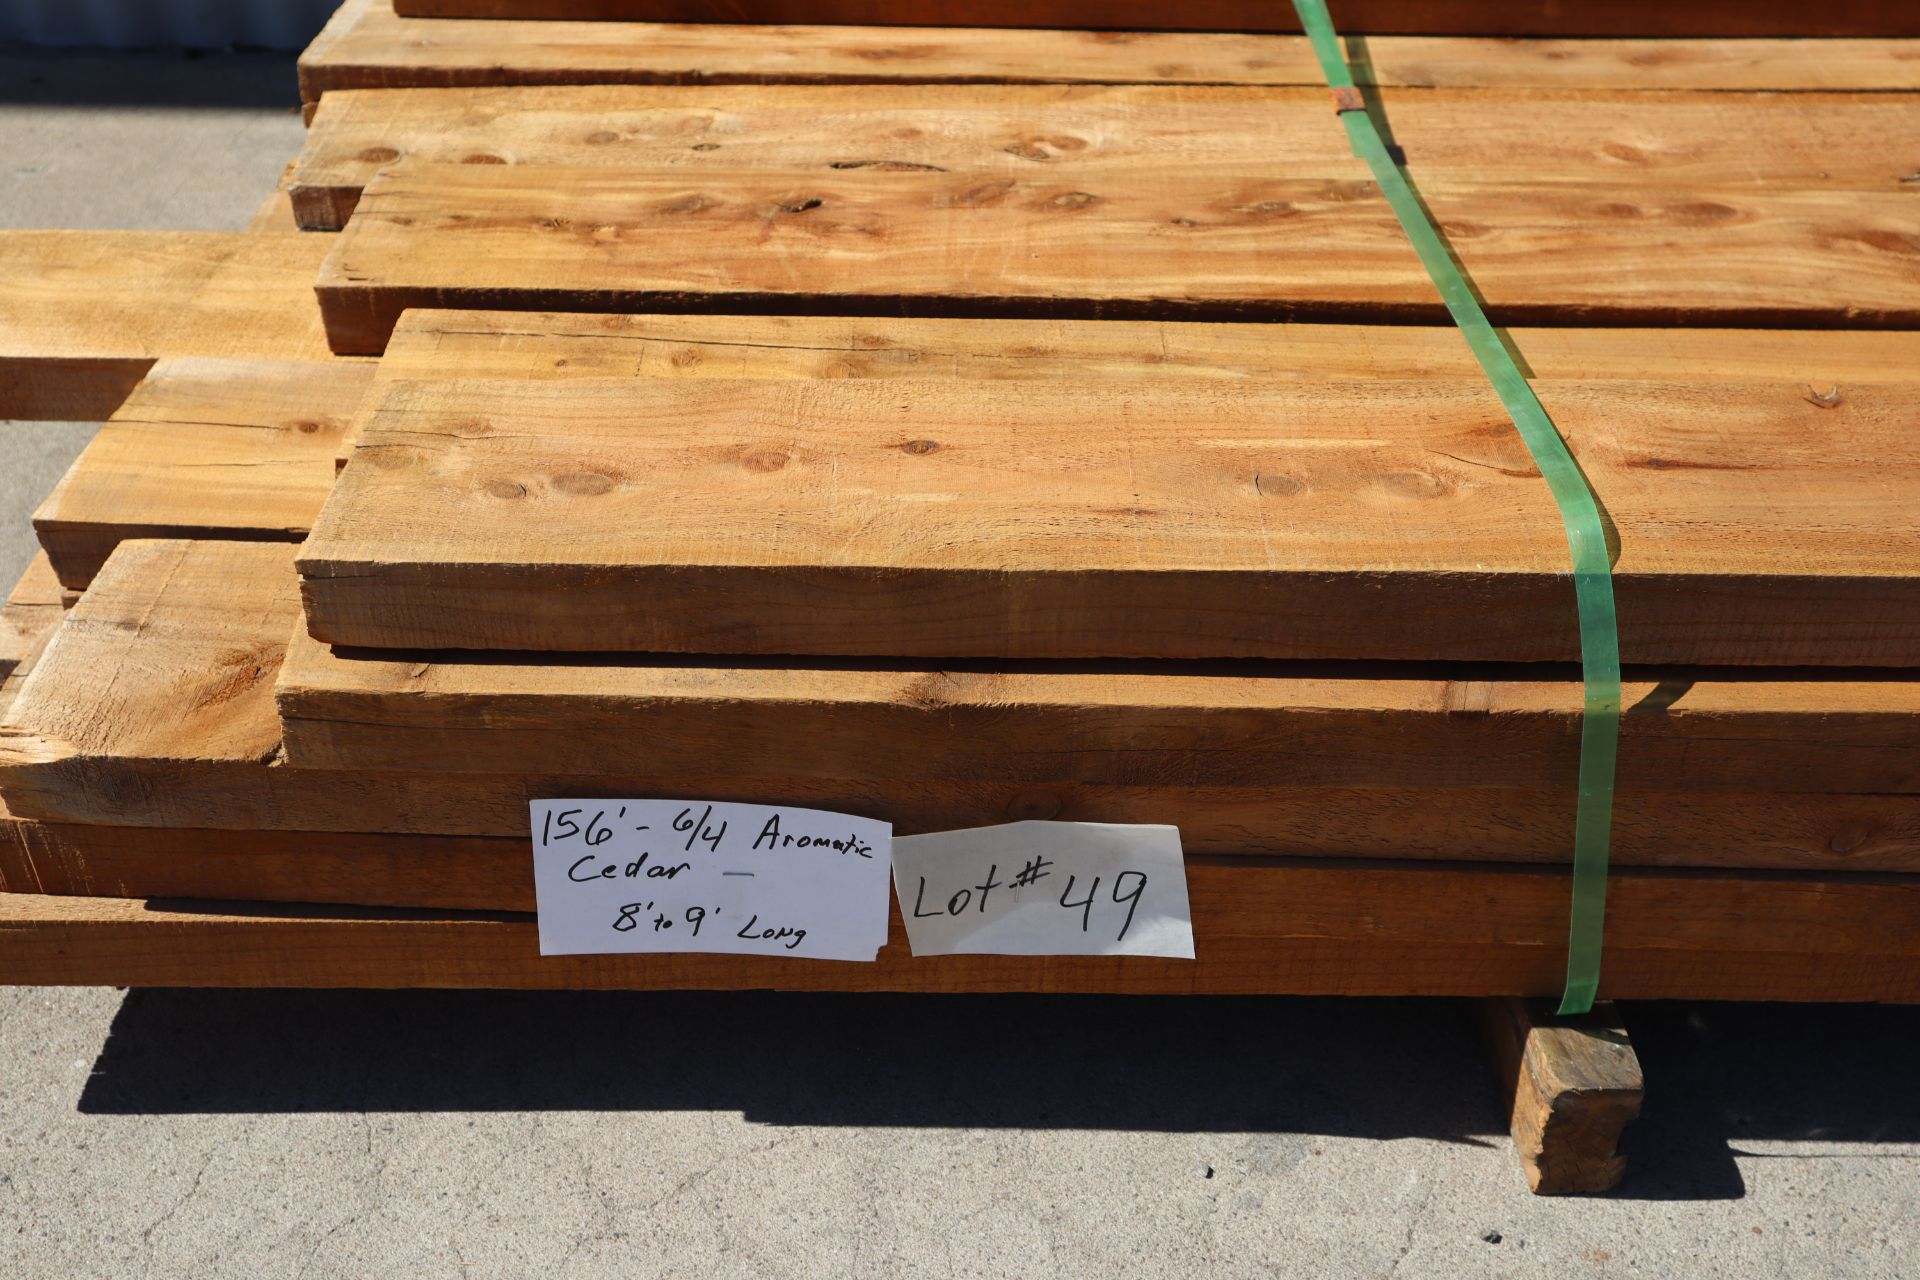 156' BFT-6/4 Aromatic Cedar, 8' to 9' Long - Image 3 of 4